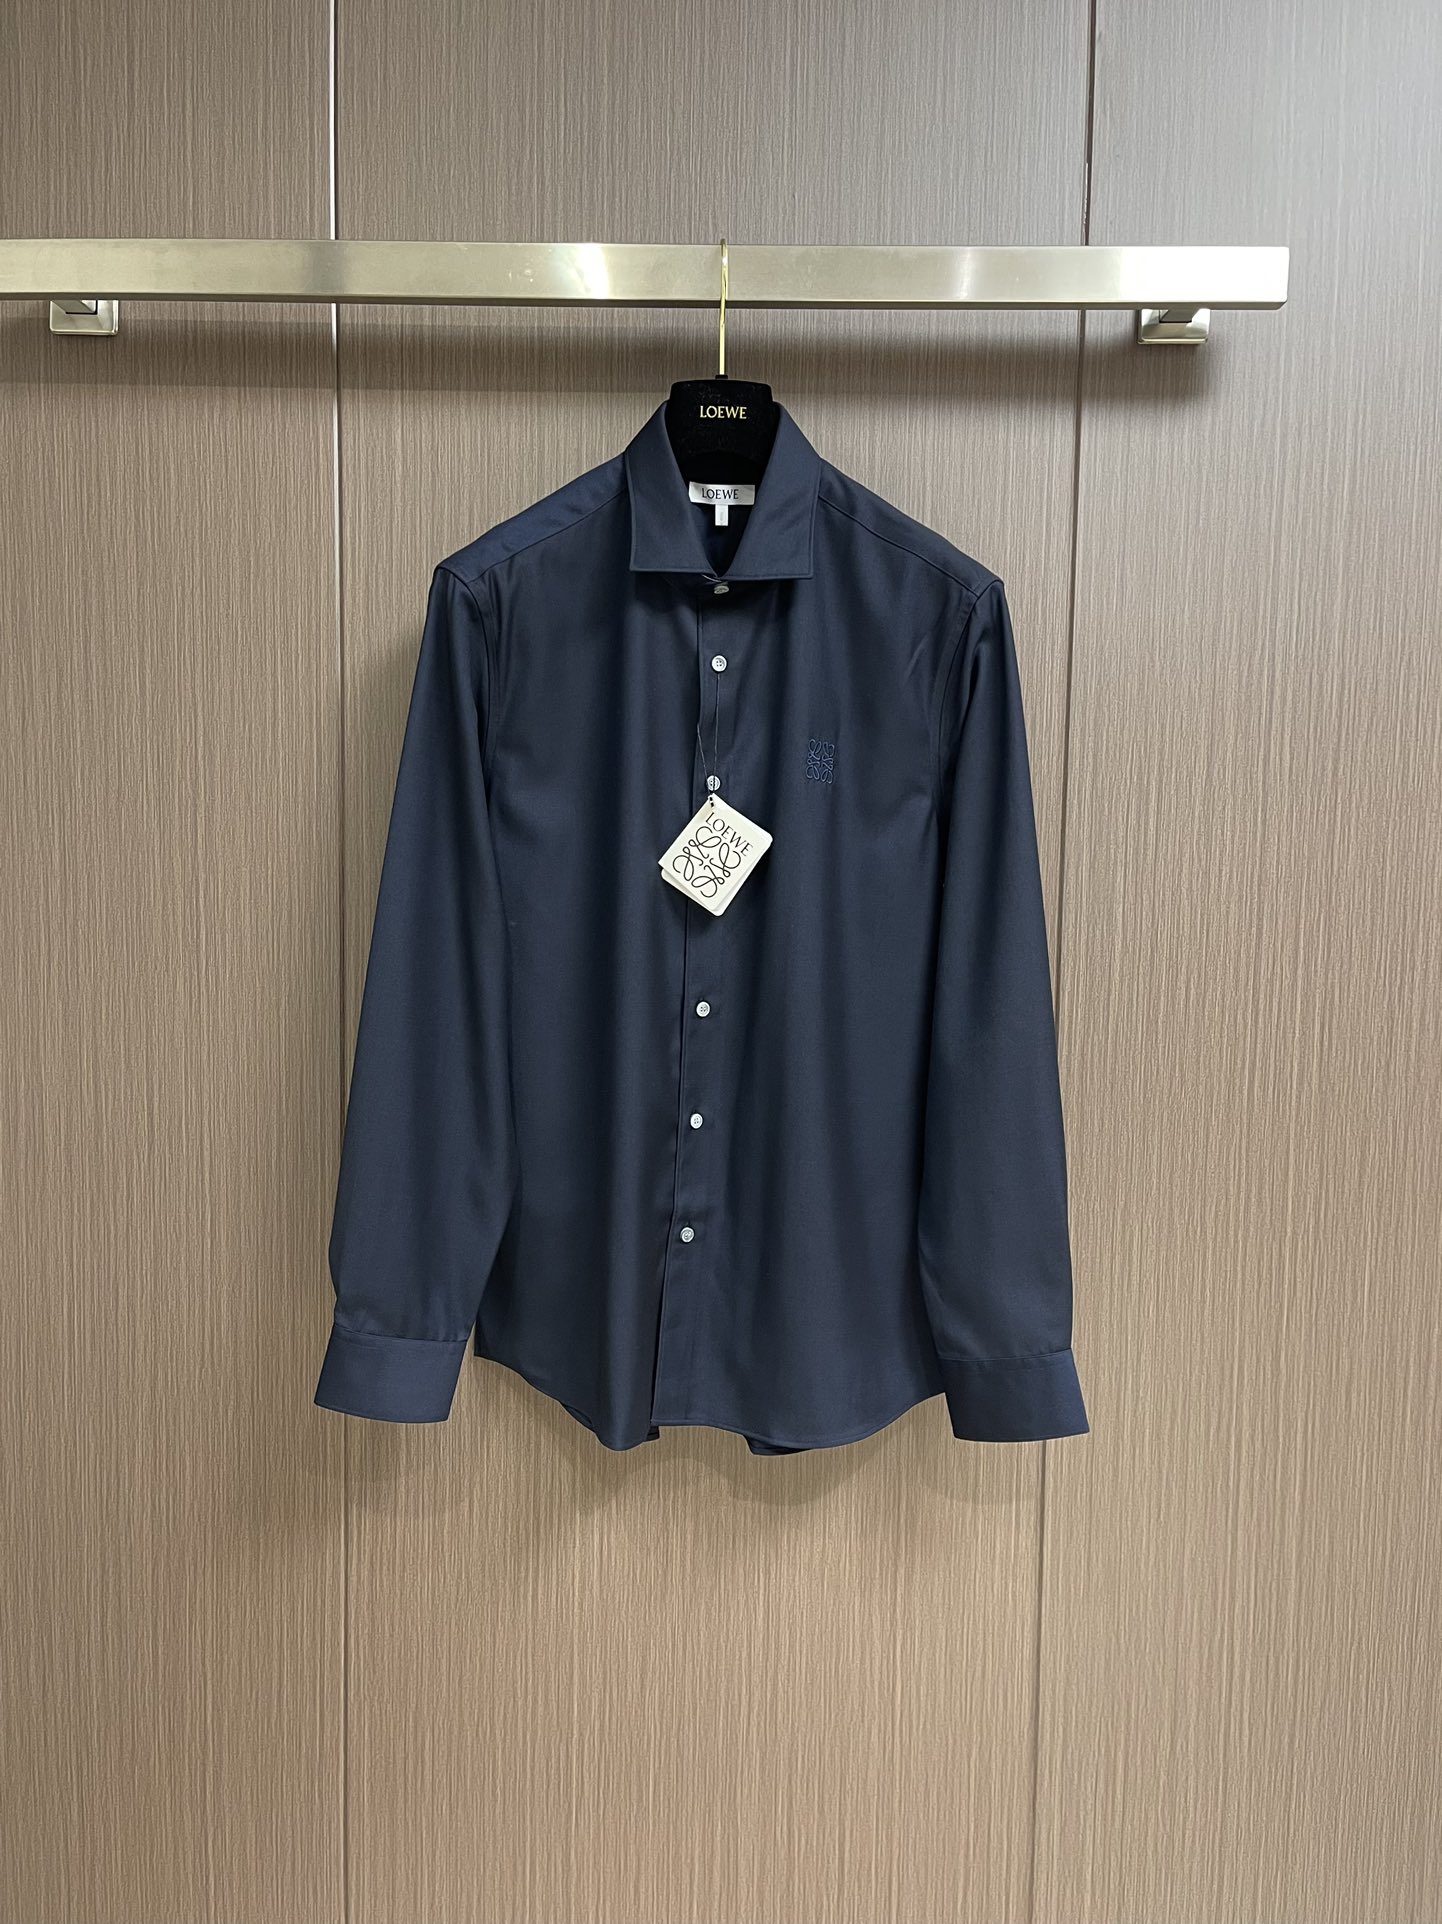 Loewe Clothing Shirts & Blouses Embroidery Fall Collection